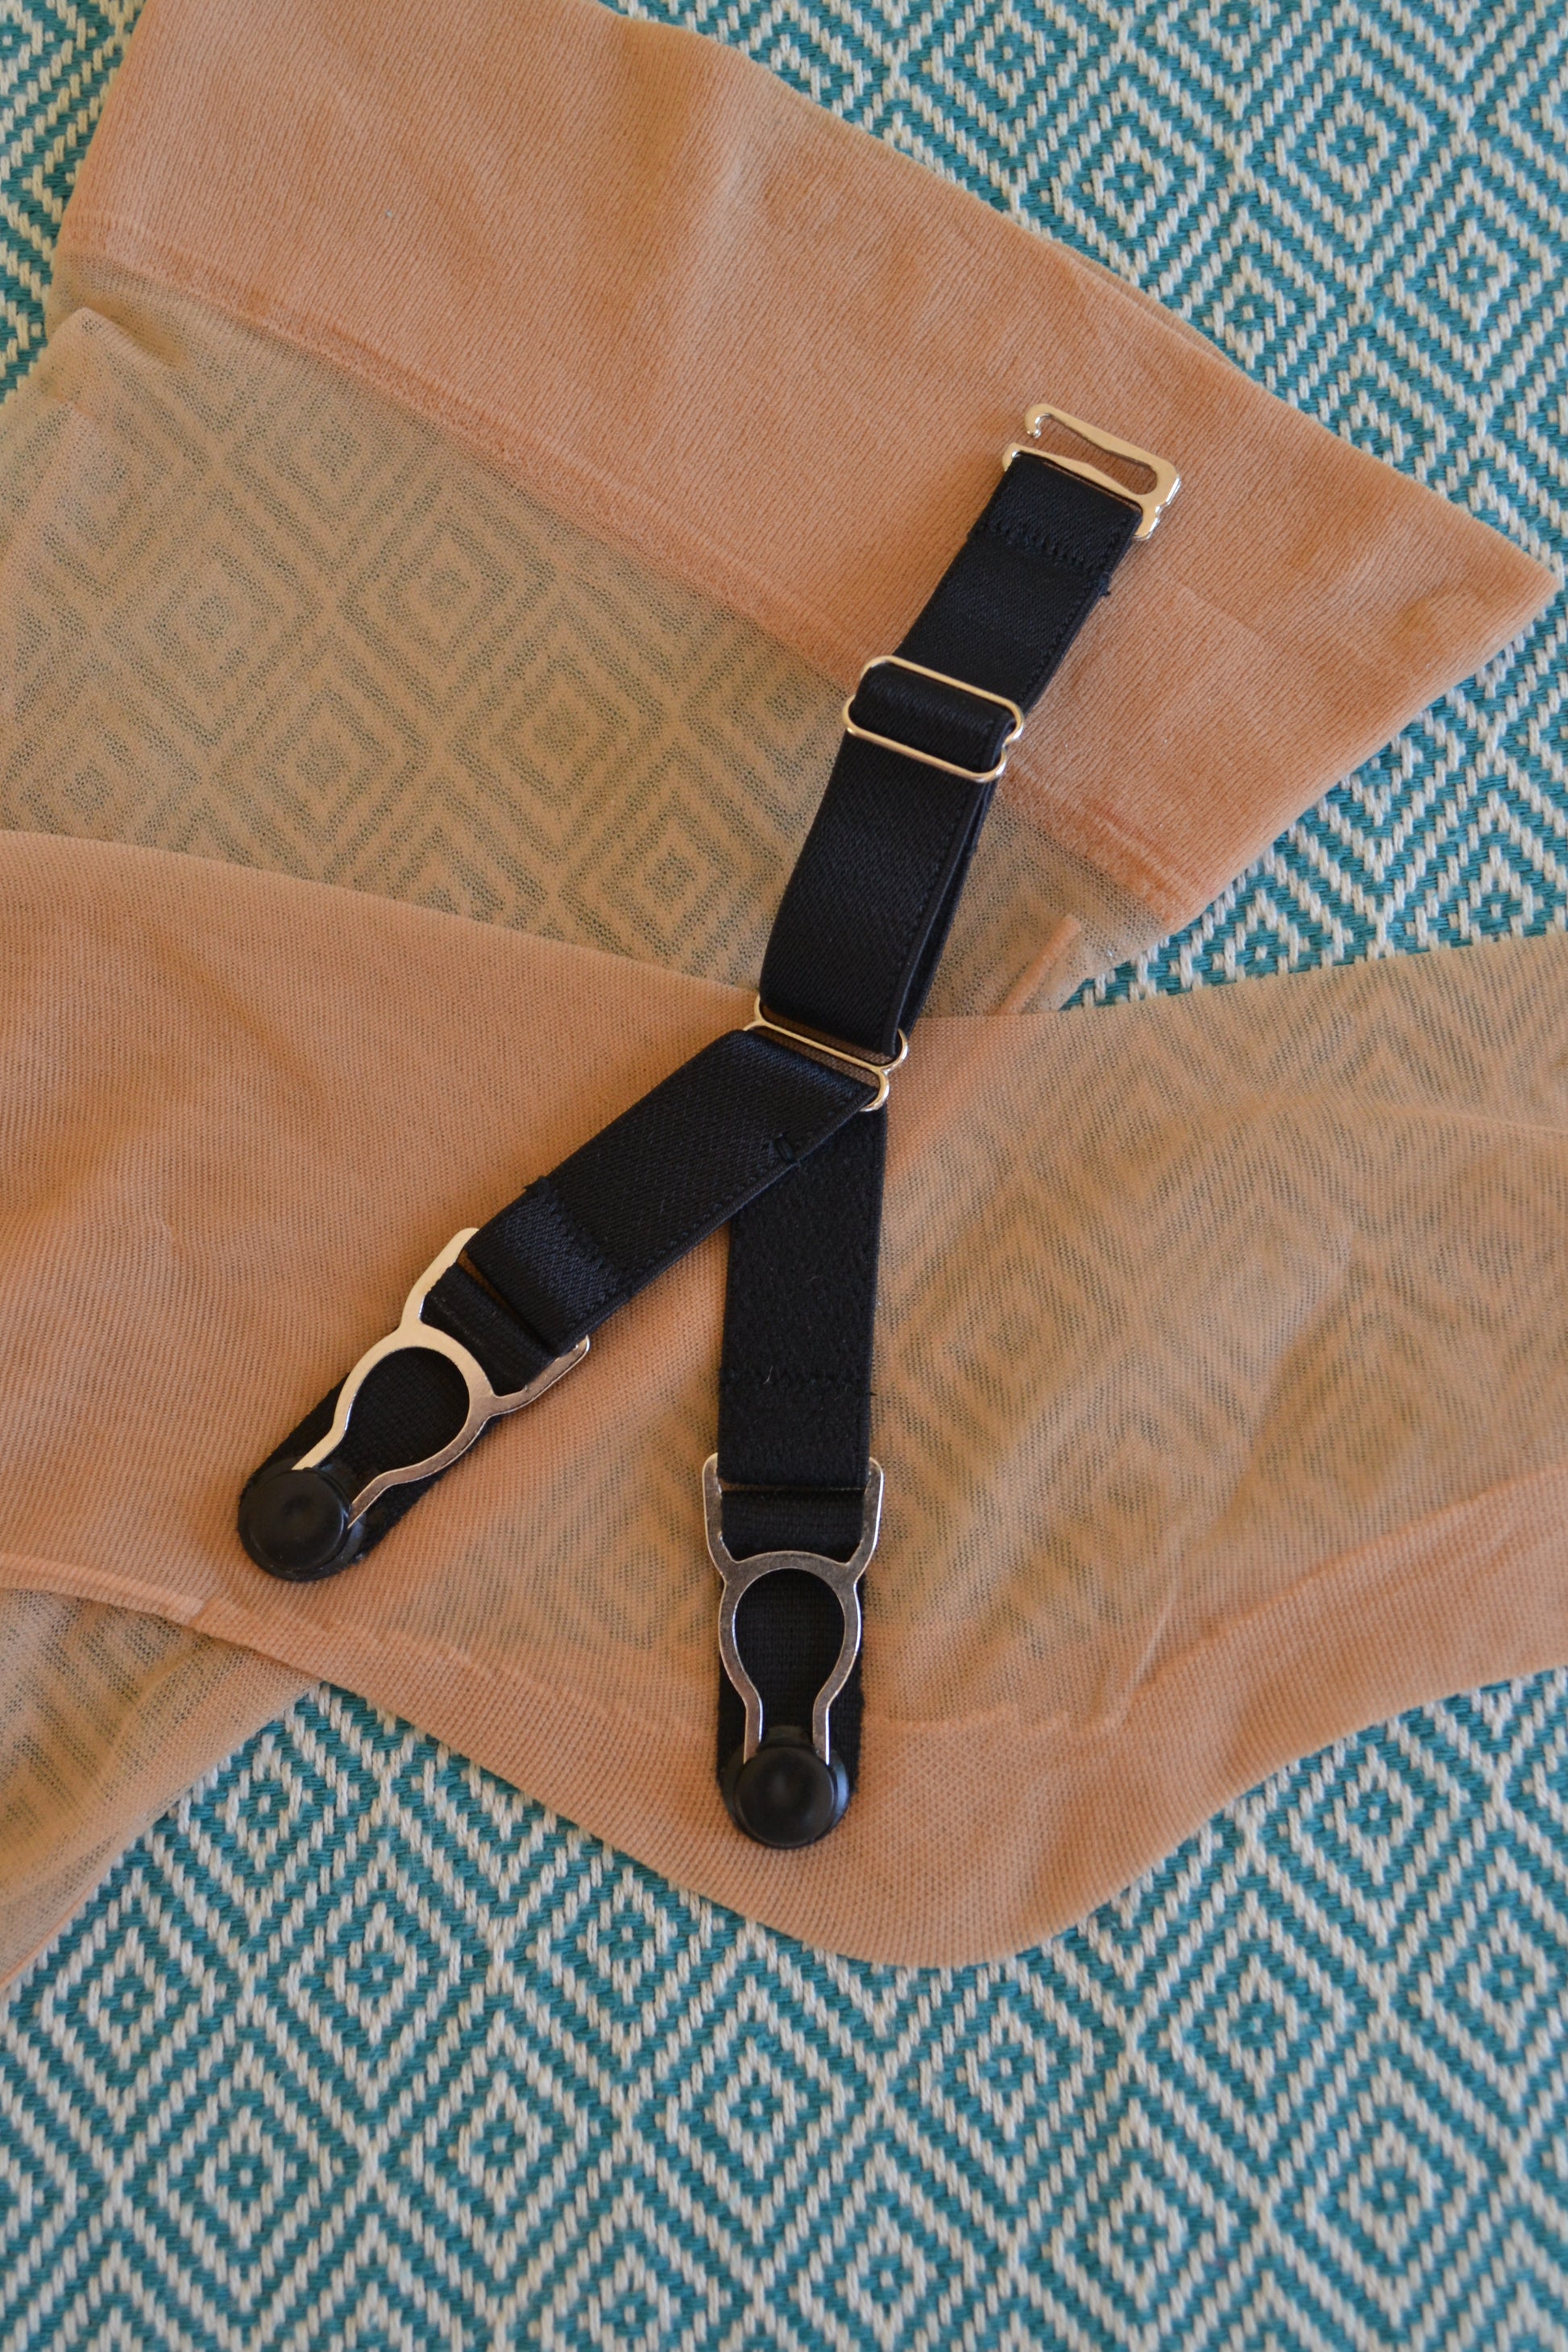  Double suspender straps Y strap garter with a hook on top to attach your corset or masque to seamed nylon stockings. 15mm wide elastic in colour black red white and nude beige biscotti peach. 